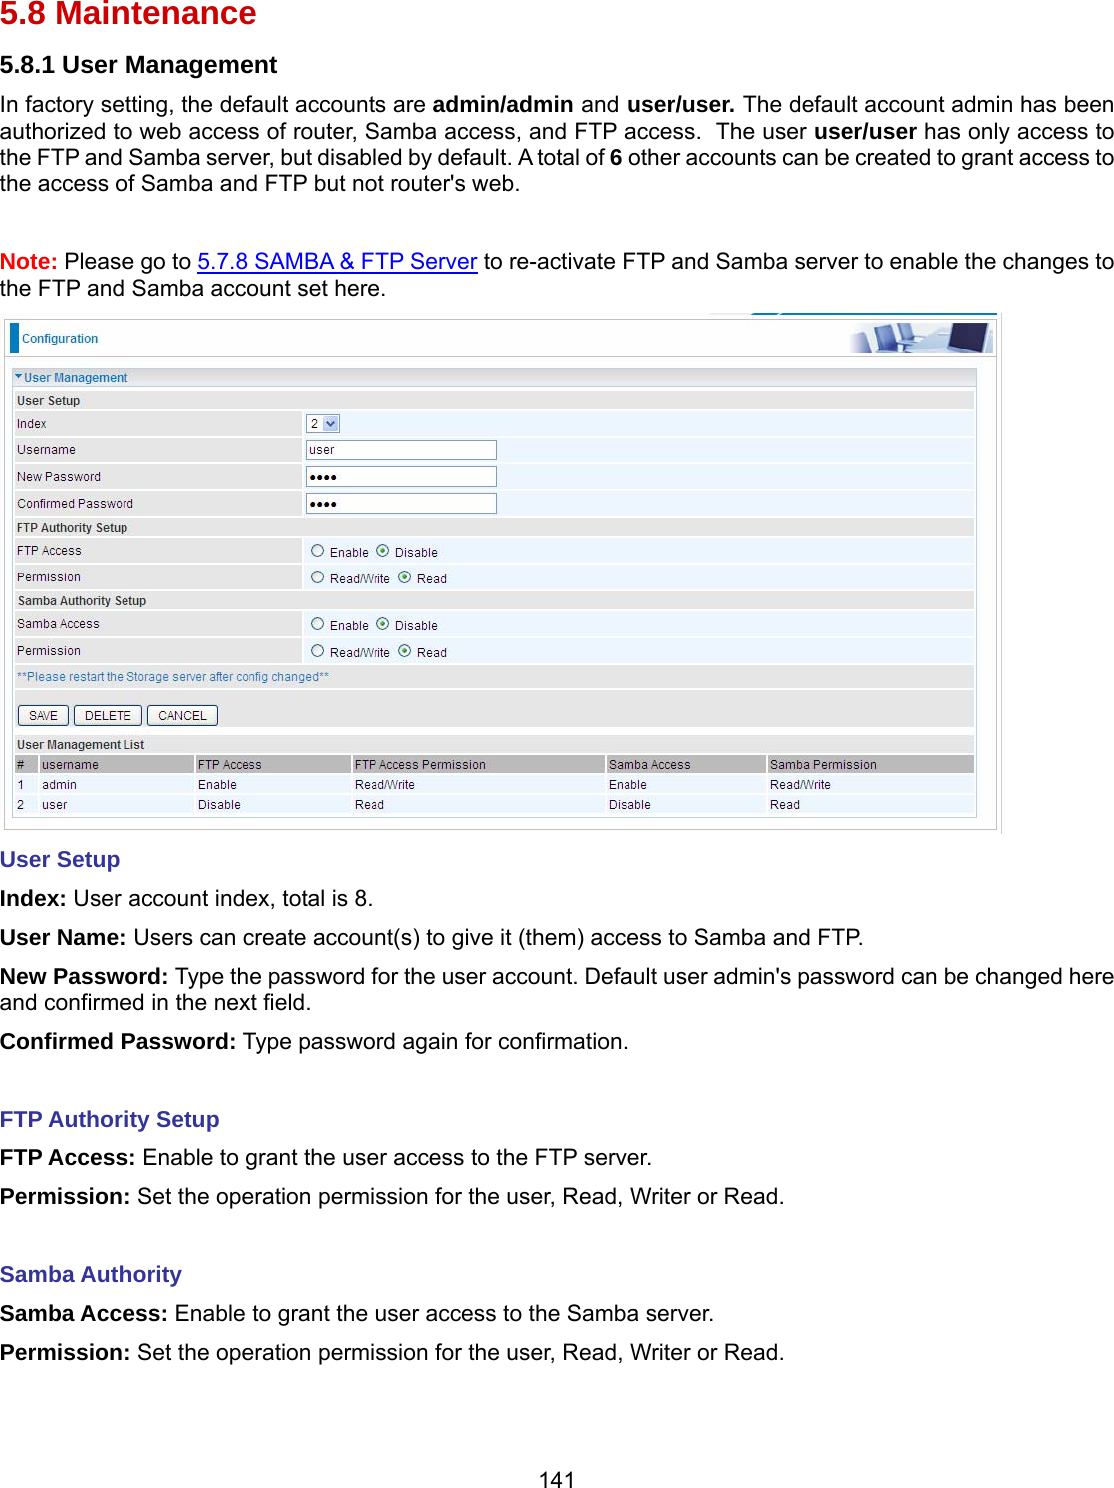 141 5.8 Maintenance 5.8.1 User Management  In factory setting, the default accounts are admin/admin and user/user. The default account admin has been authorized to web access of router, Samba access, and FTP access.  The user user/user has only access to the FTP and Samba server, but disabled by default. A total of 6 other accounts can be created to grant access to the access of Samba and FTP but not router&apos;s web.  Note: Please go to 5.7.8 SAMBA &amp; FTP Server to re-activate FTP and Samba server to enable the changes to the FTP and Samba account set here.   User Setup Index: User account index, total is 8. User Name: Users can create account(s) to give it (them) access to Samba and FTP.  New Password: Type the password for the user account. Default user admin&apos;s password can be changed here and confirmed in the next field. Confirmed Password: Type password again for confirmation.  FTP Authority Setup FTP Access: Enable to grant the user access to the FTP server. Permission: Set the operation permission for the user, Read, Writer or Read.  Samba Authority Samba Access: Enable to grant the user access to the Samba server. Permission: Set the operation permission for the user, Read, Writer or Read.   